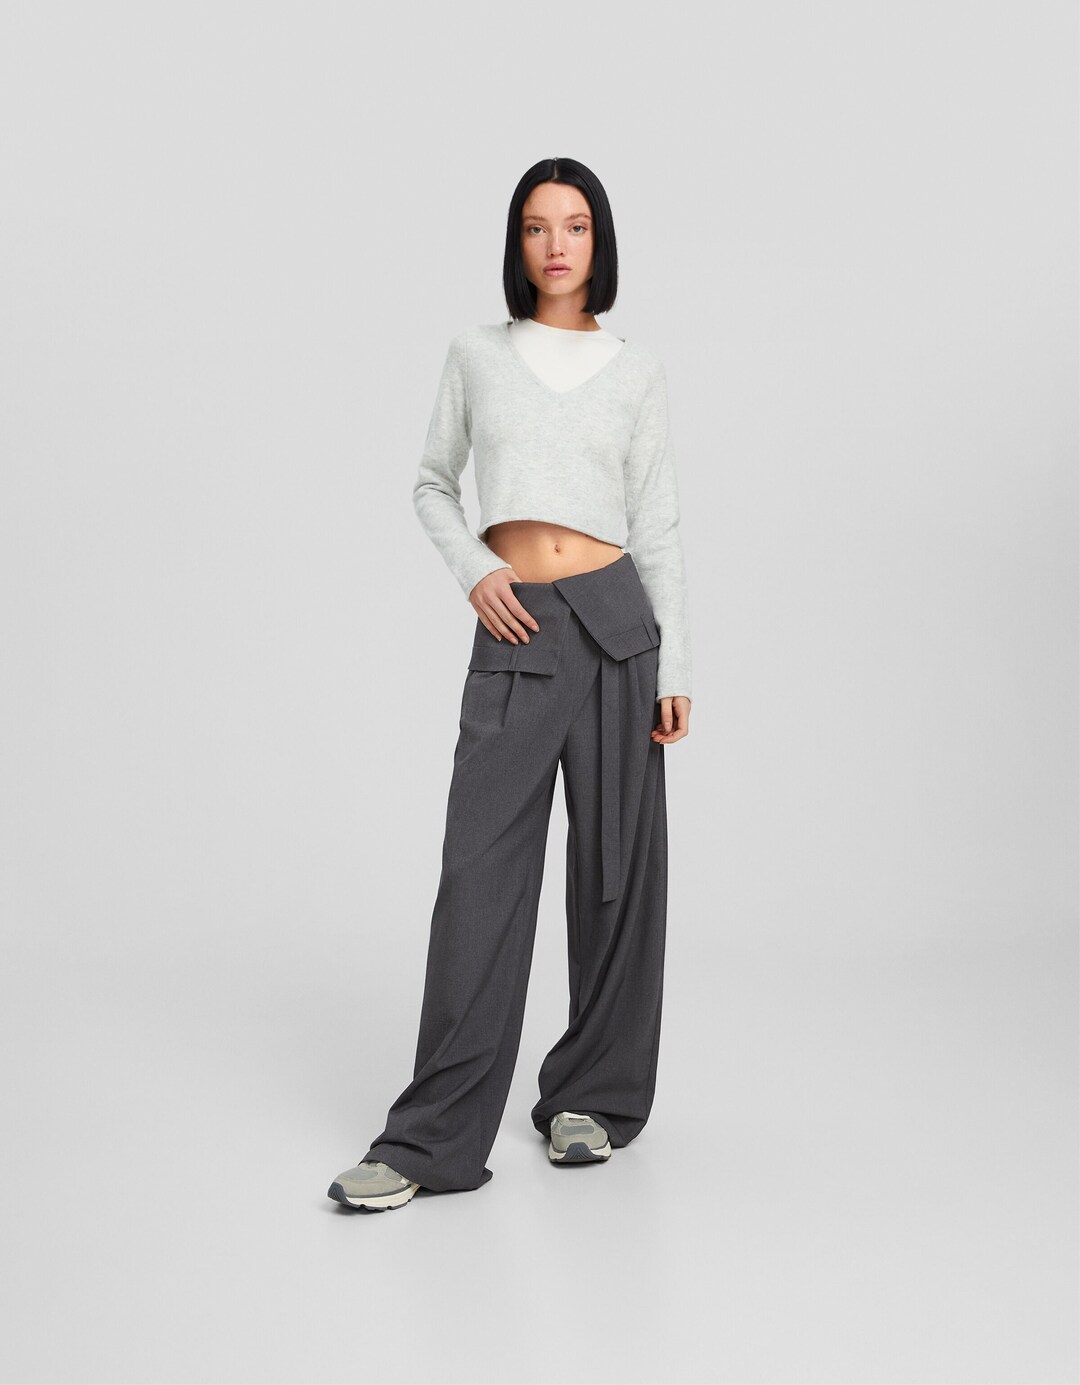 Tailored trousers with sash waist